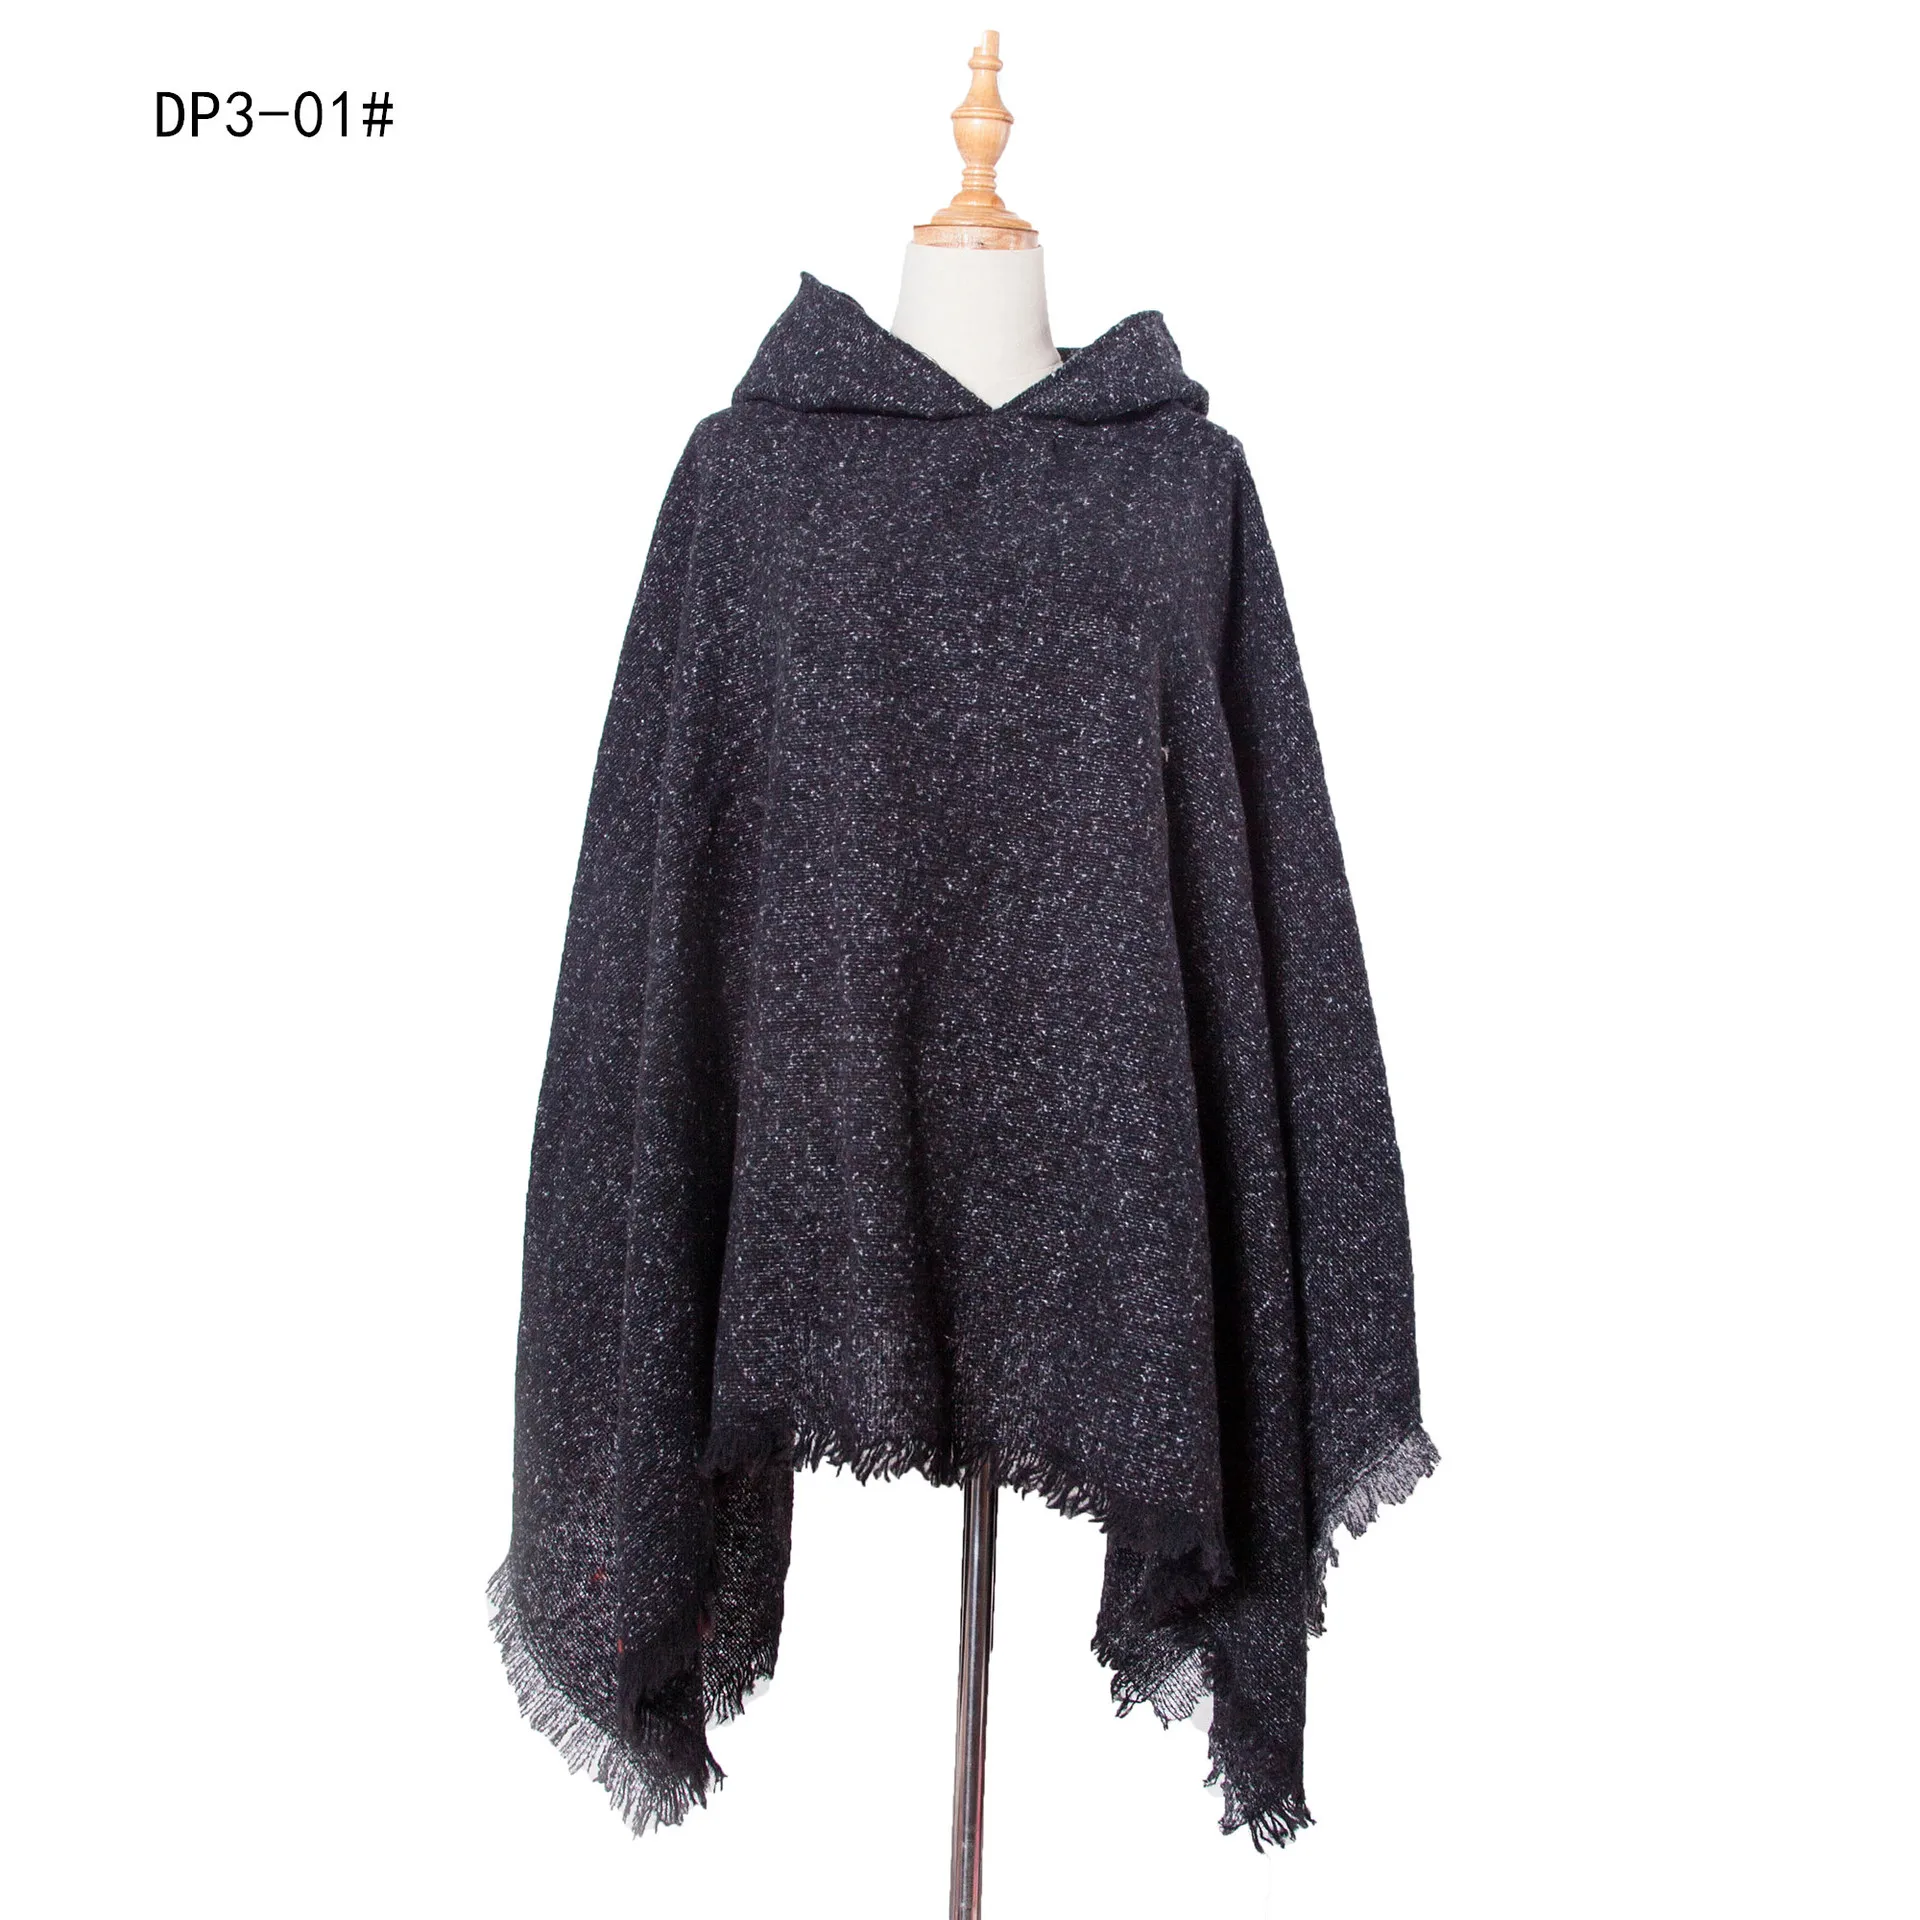 Autumn Winter New Loop Yarn Hooded Pullover Tourism Solid Color Cape Women Fashion Street Poncho Lady Capes Black Cloaks women s sportswear suits colorful comfortable elastic yoga fashion jogging mountain climbing outdoor fitness tourism lady girl